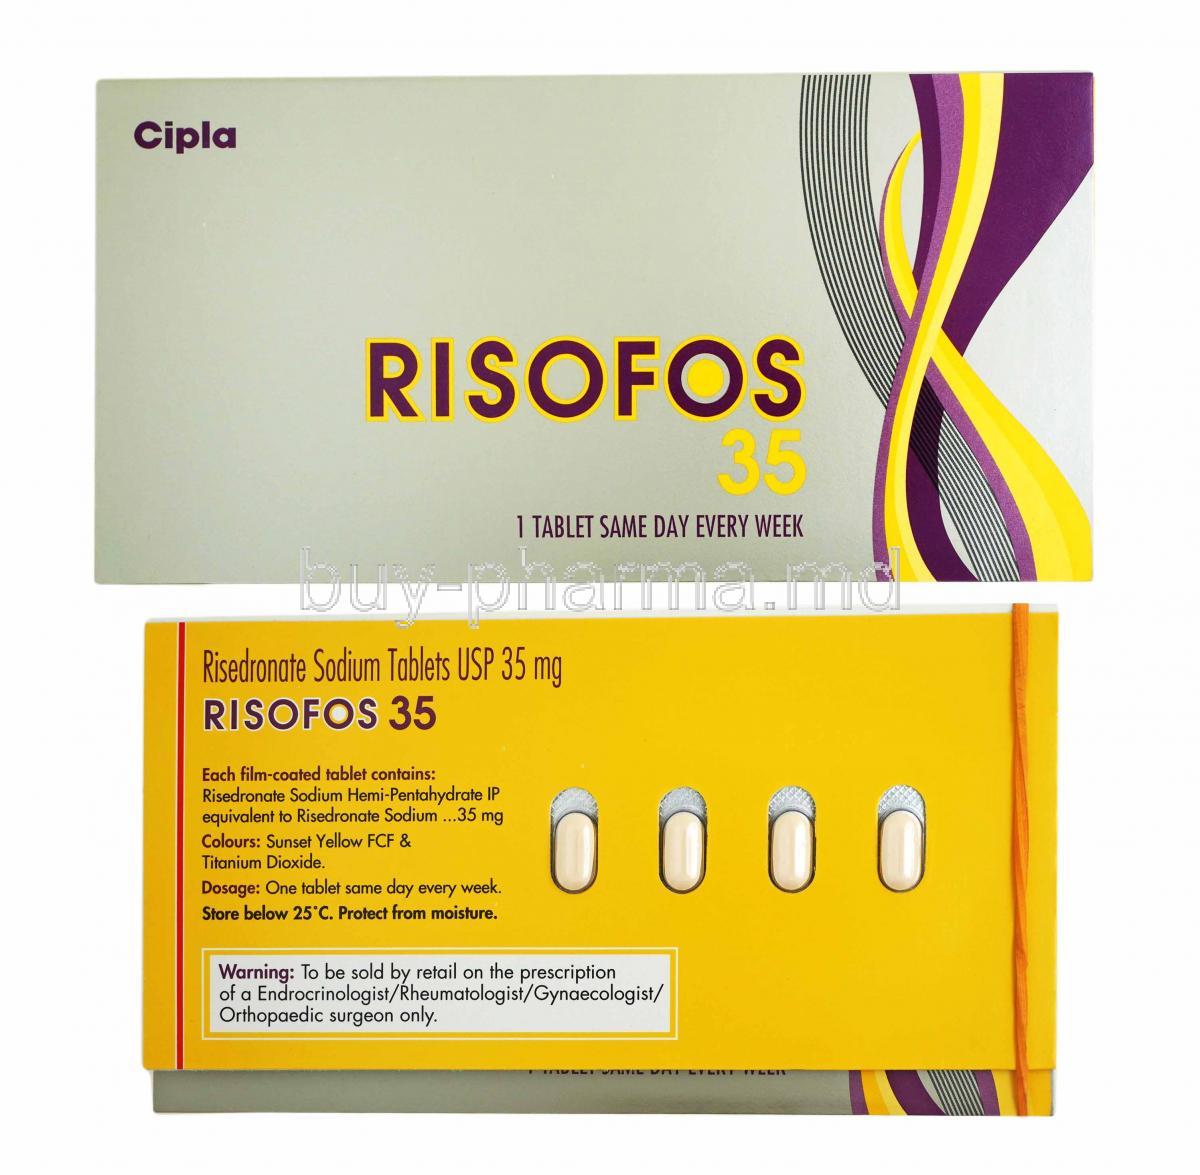 Risofos, Risedronate 35mg box and tablets